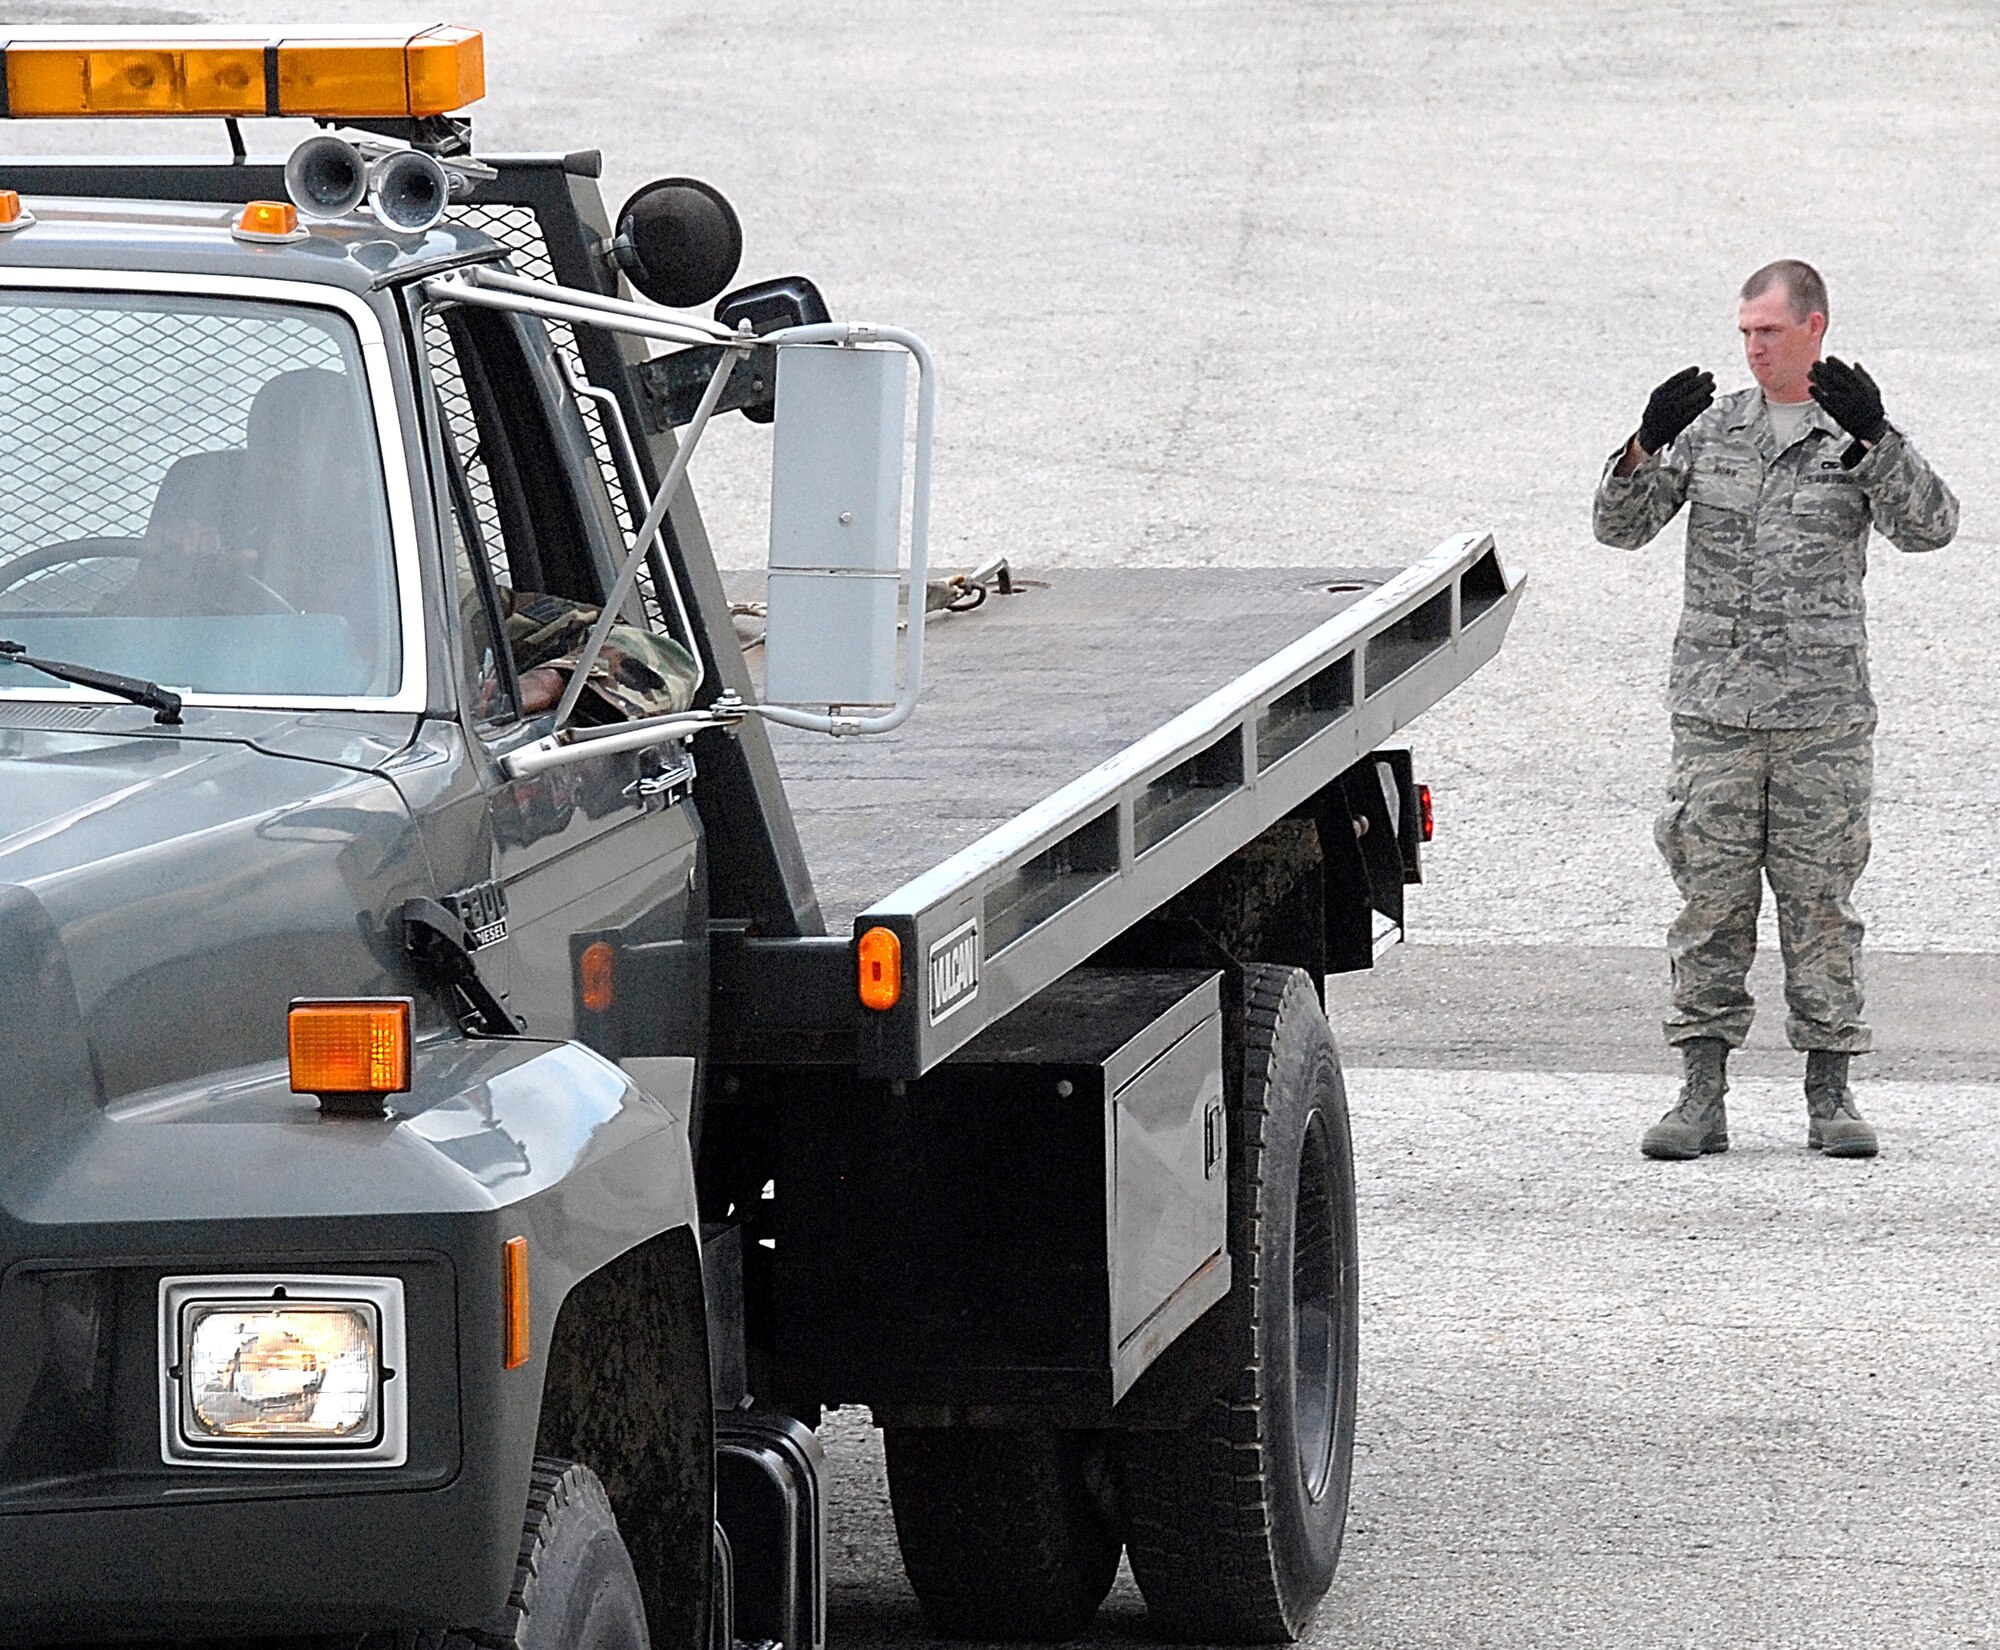 Staff Sgt. Josh Burr, marshals Senior Airman Carnell Alford, as he backs a vehicle in the transportation compound. Sergeant Burr and Airman Alford are vehicle operators with the 442nd Logistics Readiness Squadron, which is part of the 442nd Fighter Wing, an Air Force Reserve Command A-10, Thunderbolt II, fighter unit based at Whiteman Air Force Base, Mo. (US Air Force photo/MSgt. Bill Huntington)